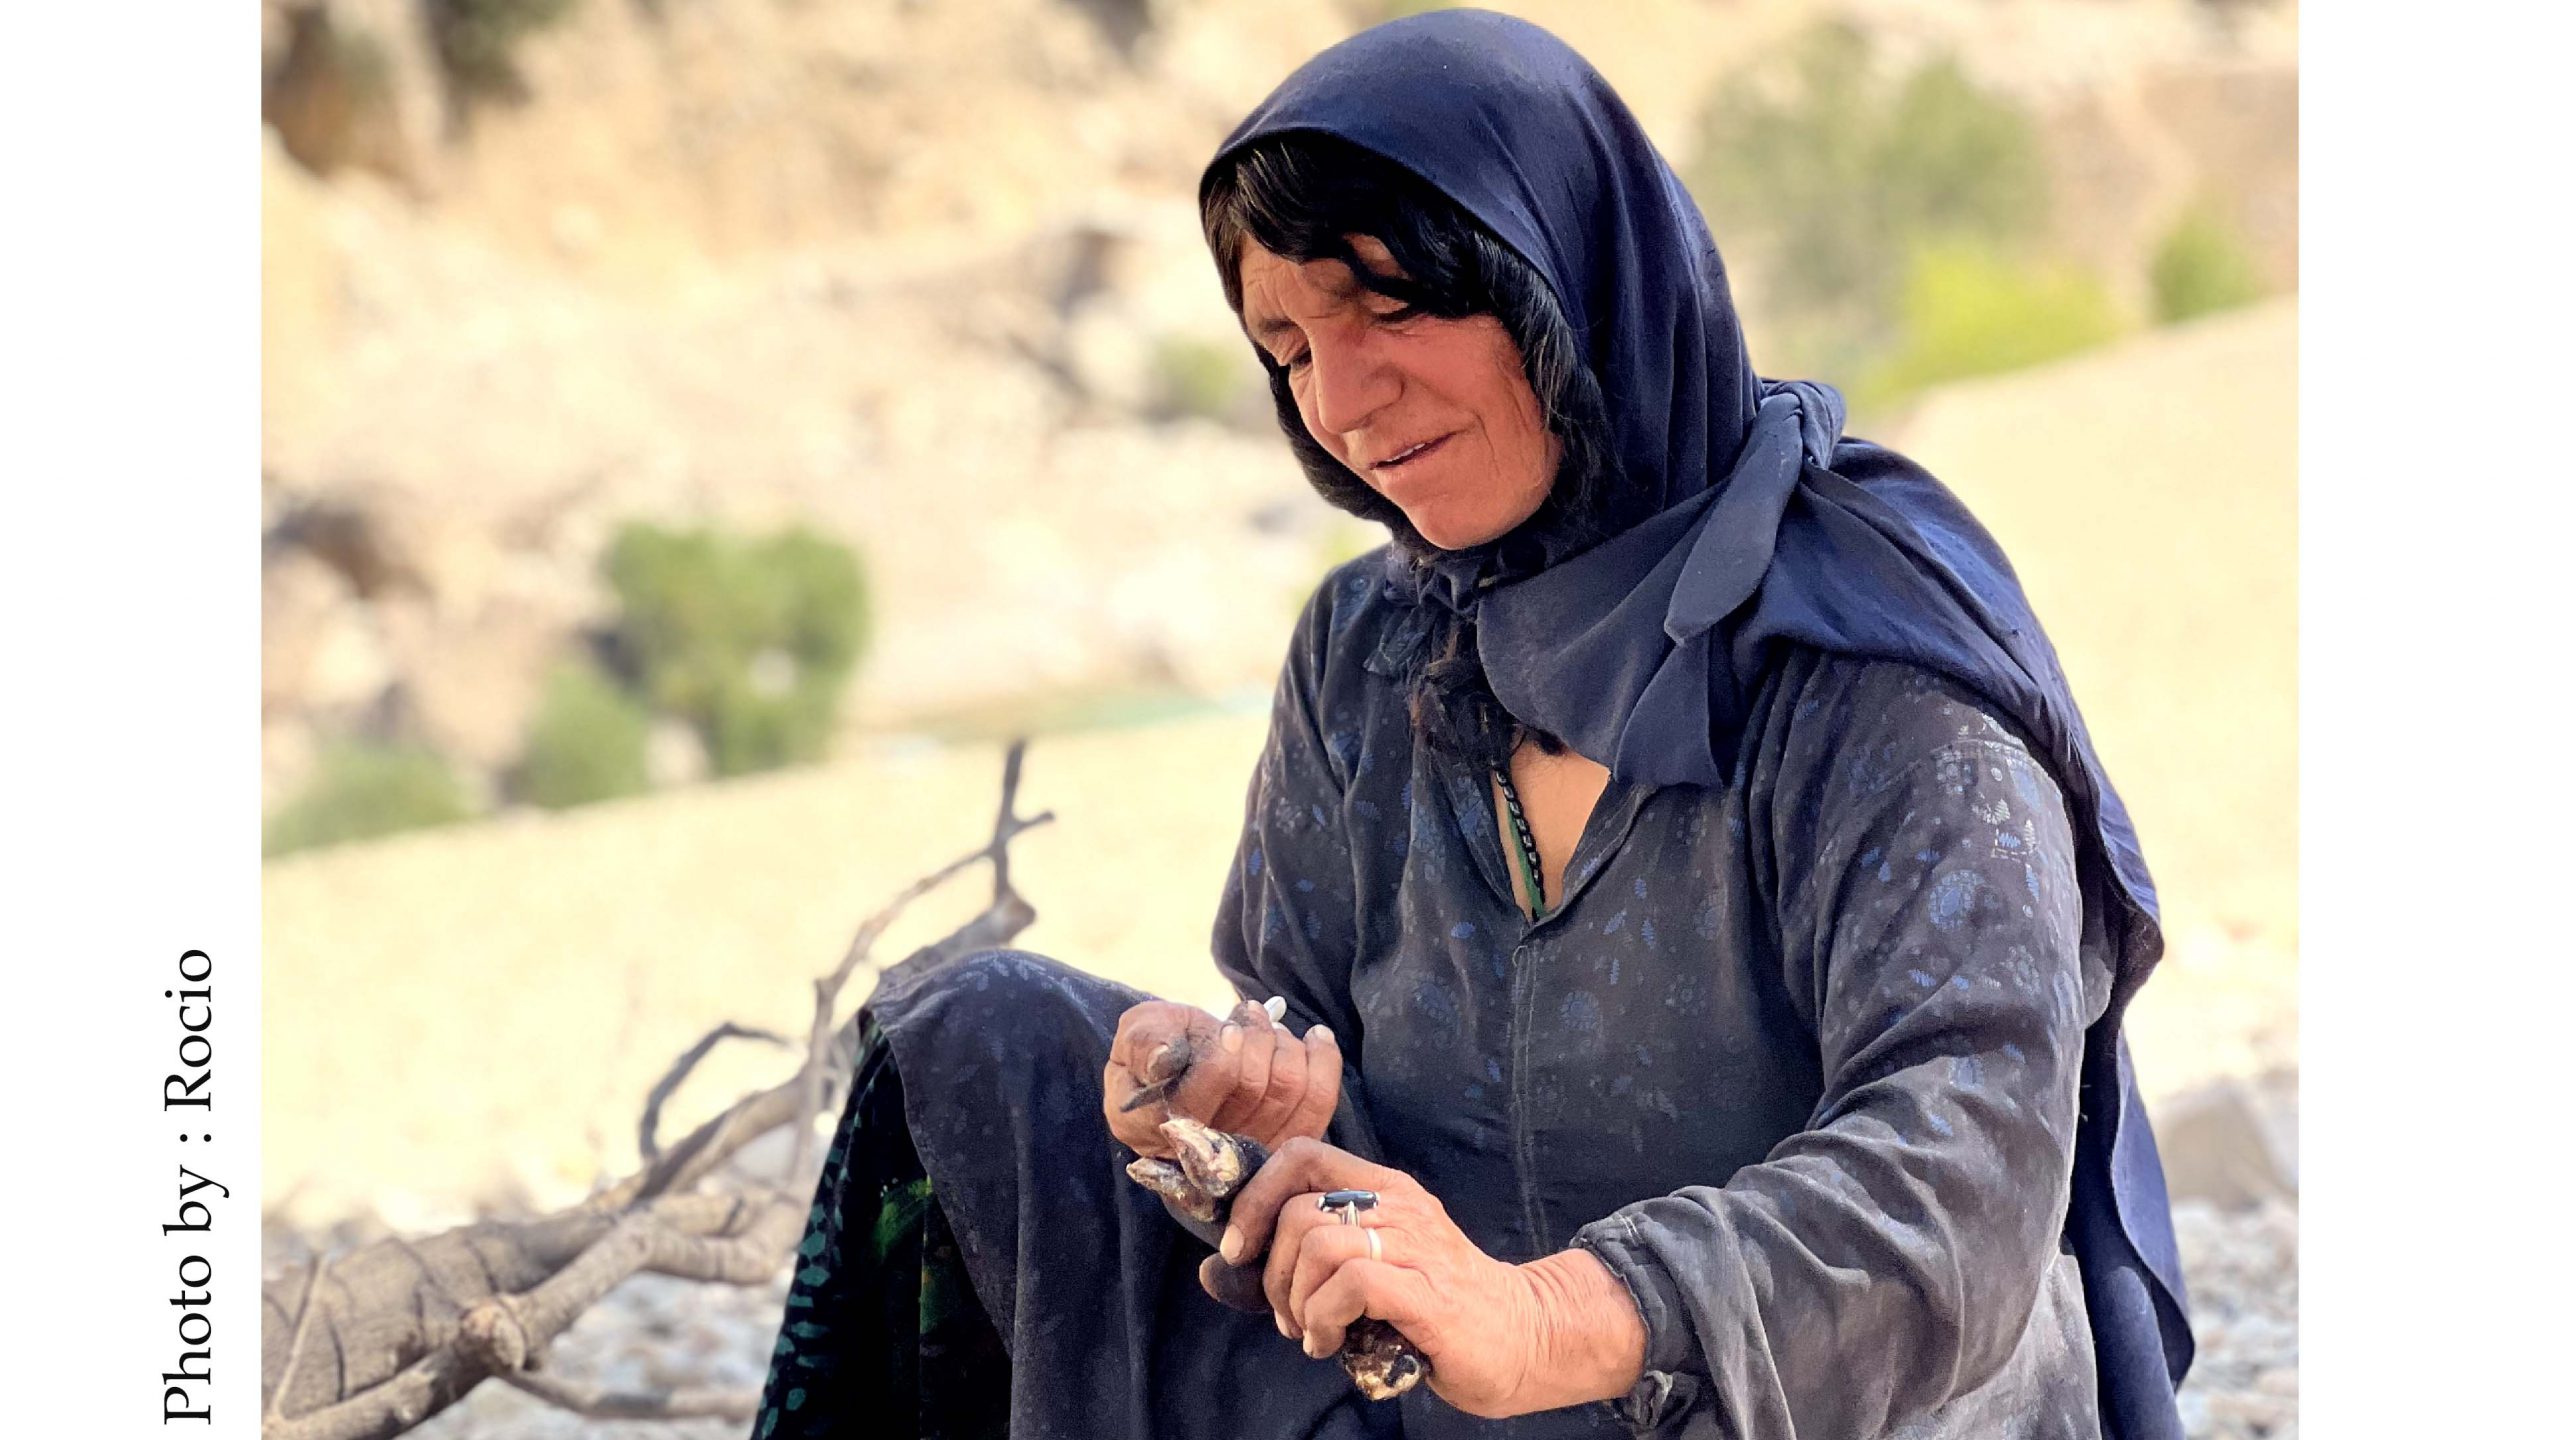 A nomad woman with Torneh, making something with knife & wood